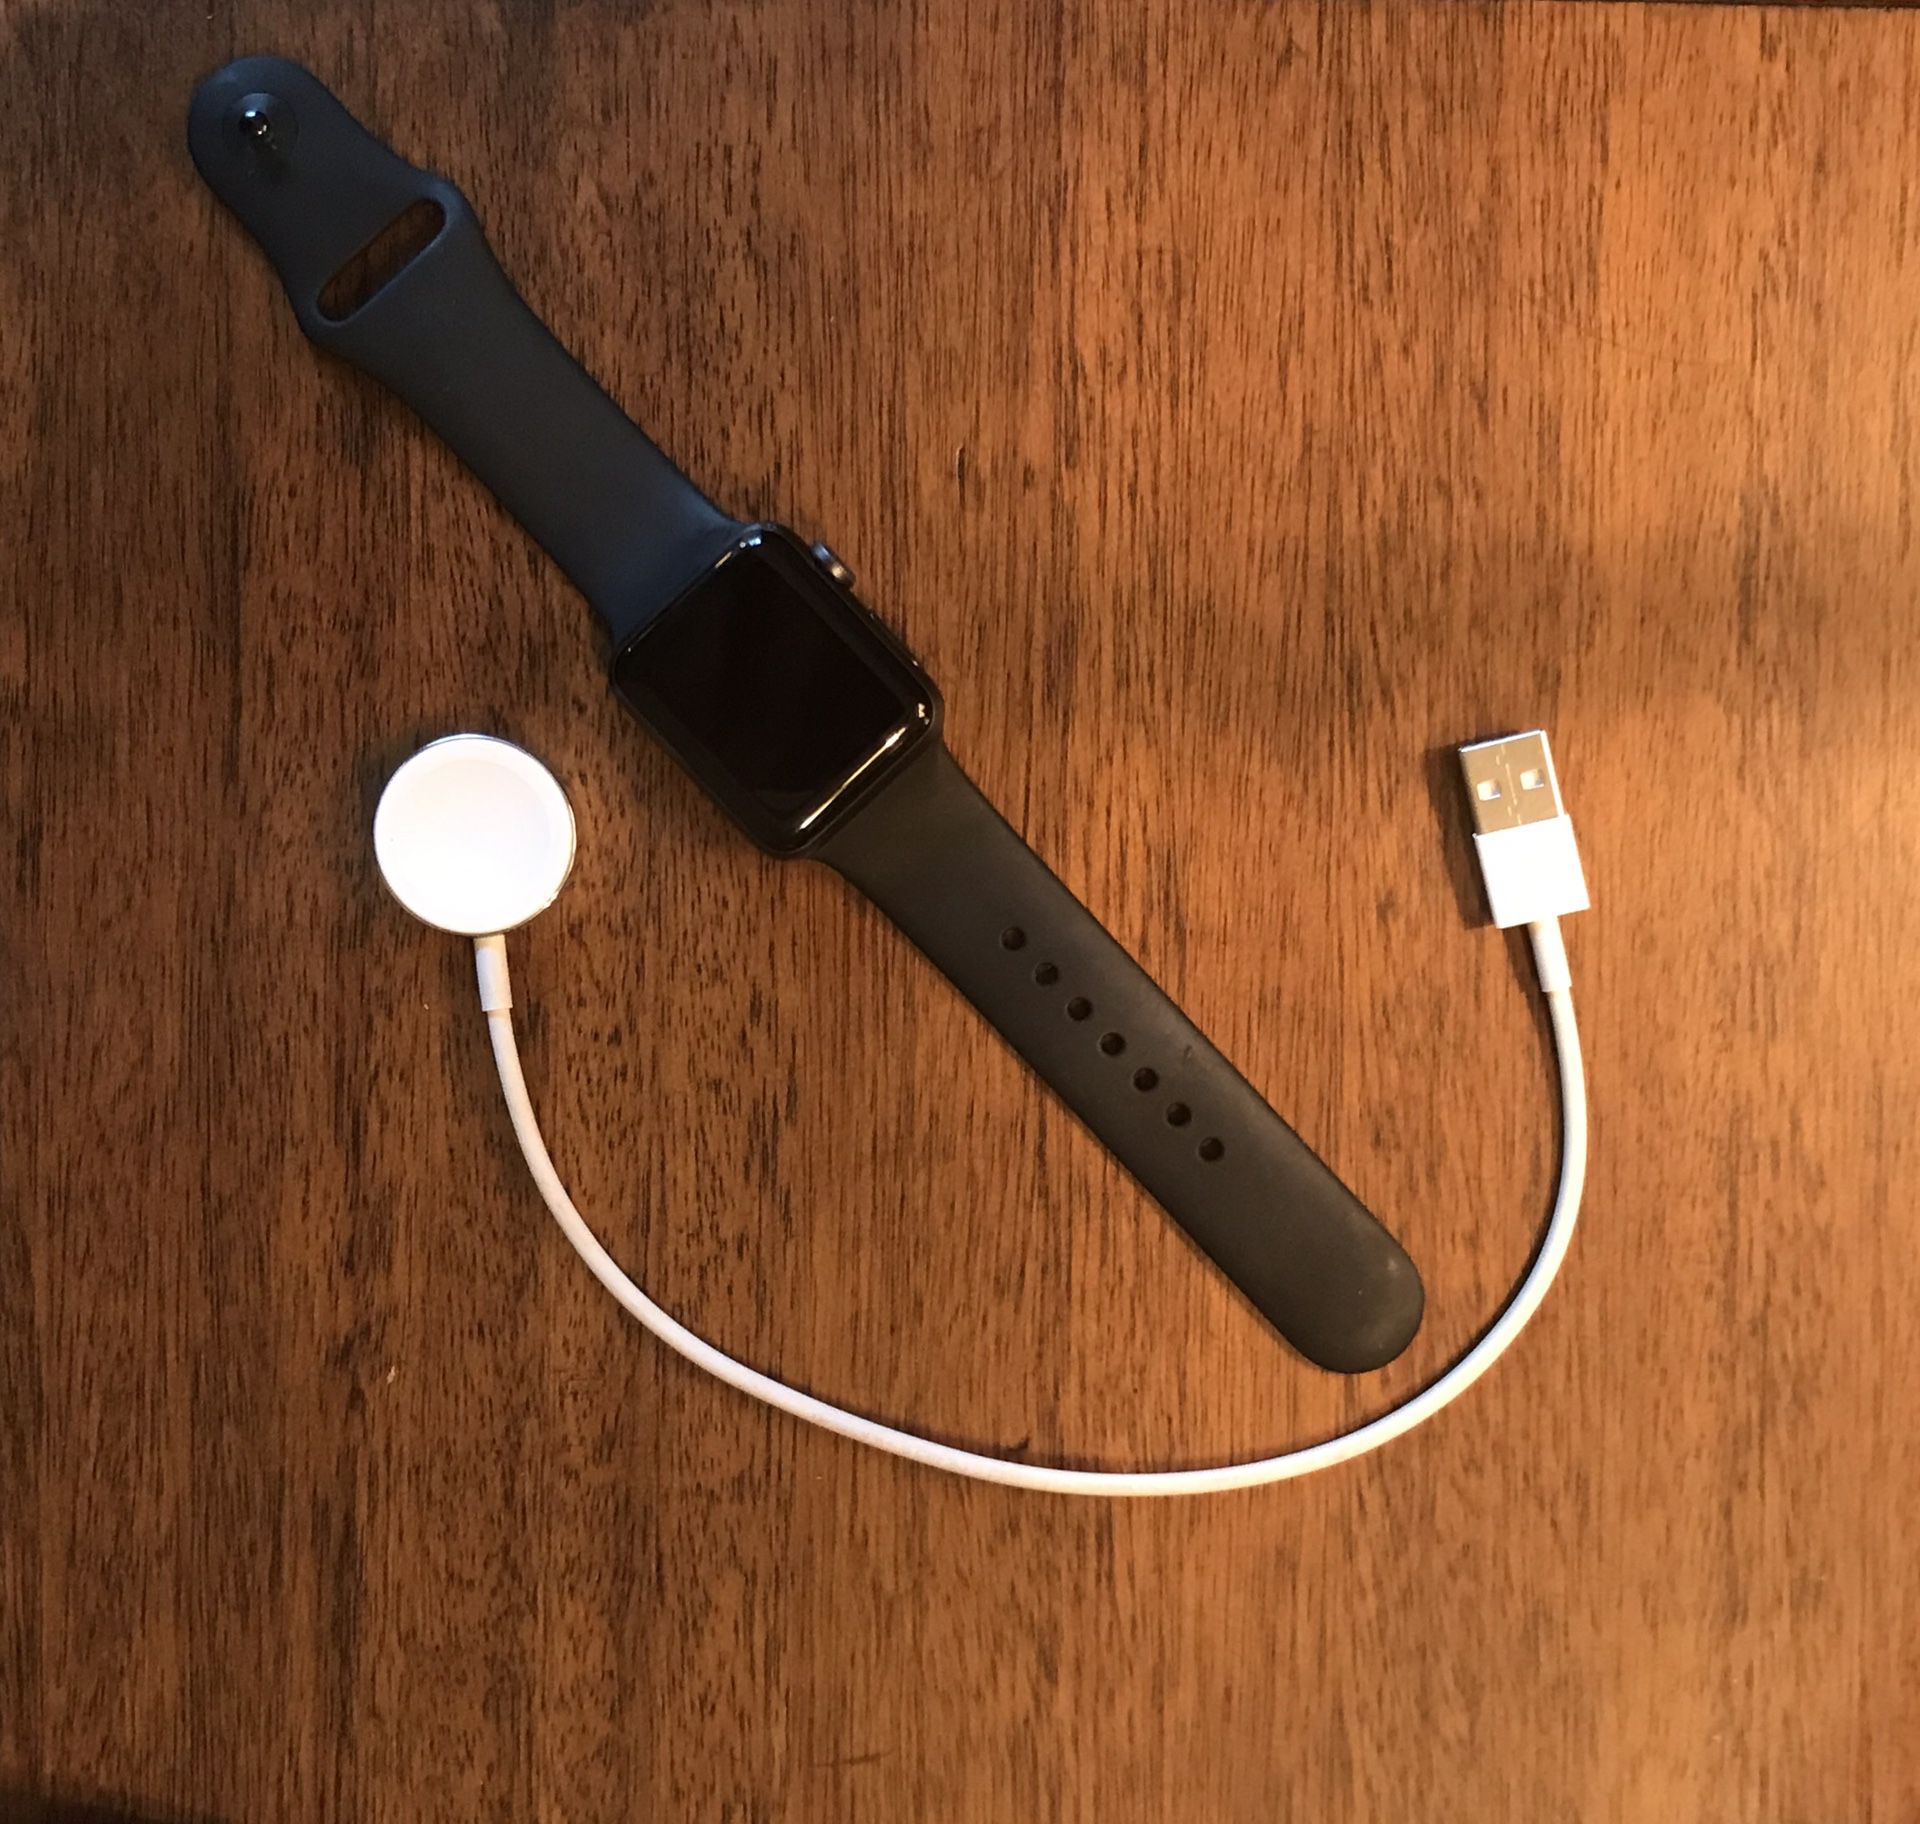 Series 2 Apple Watch - 38mm - comes with box